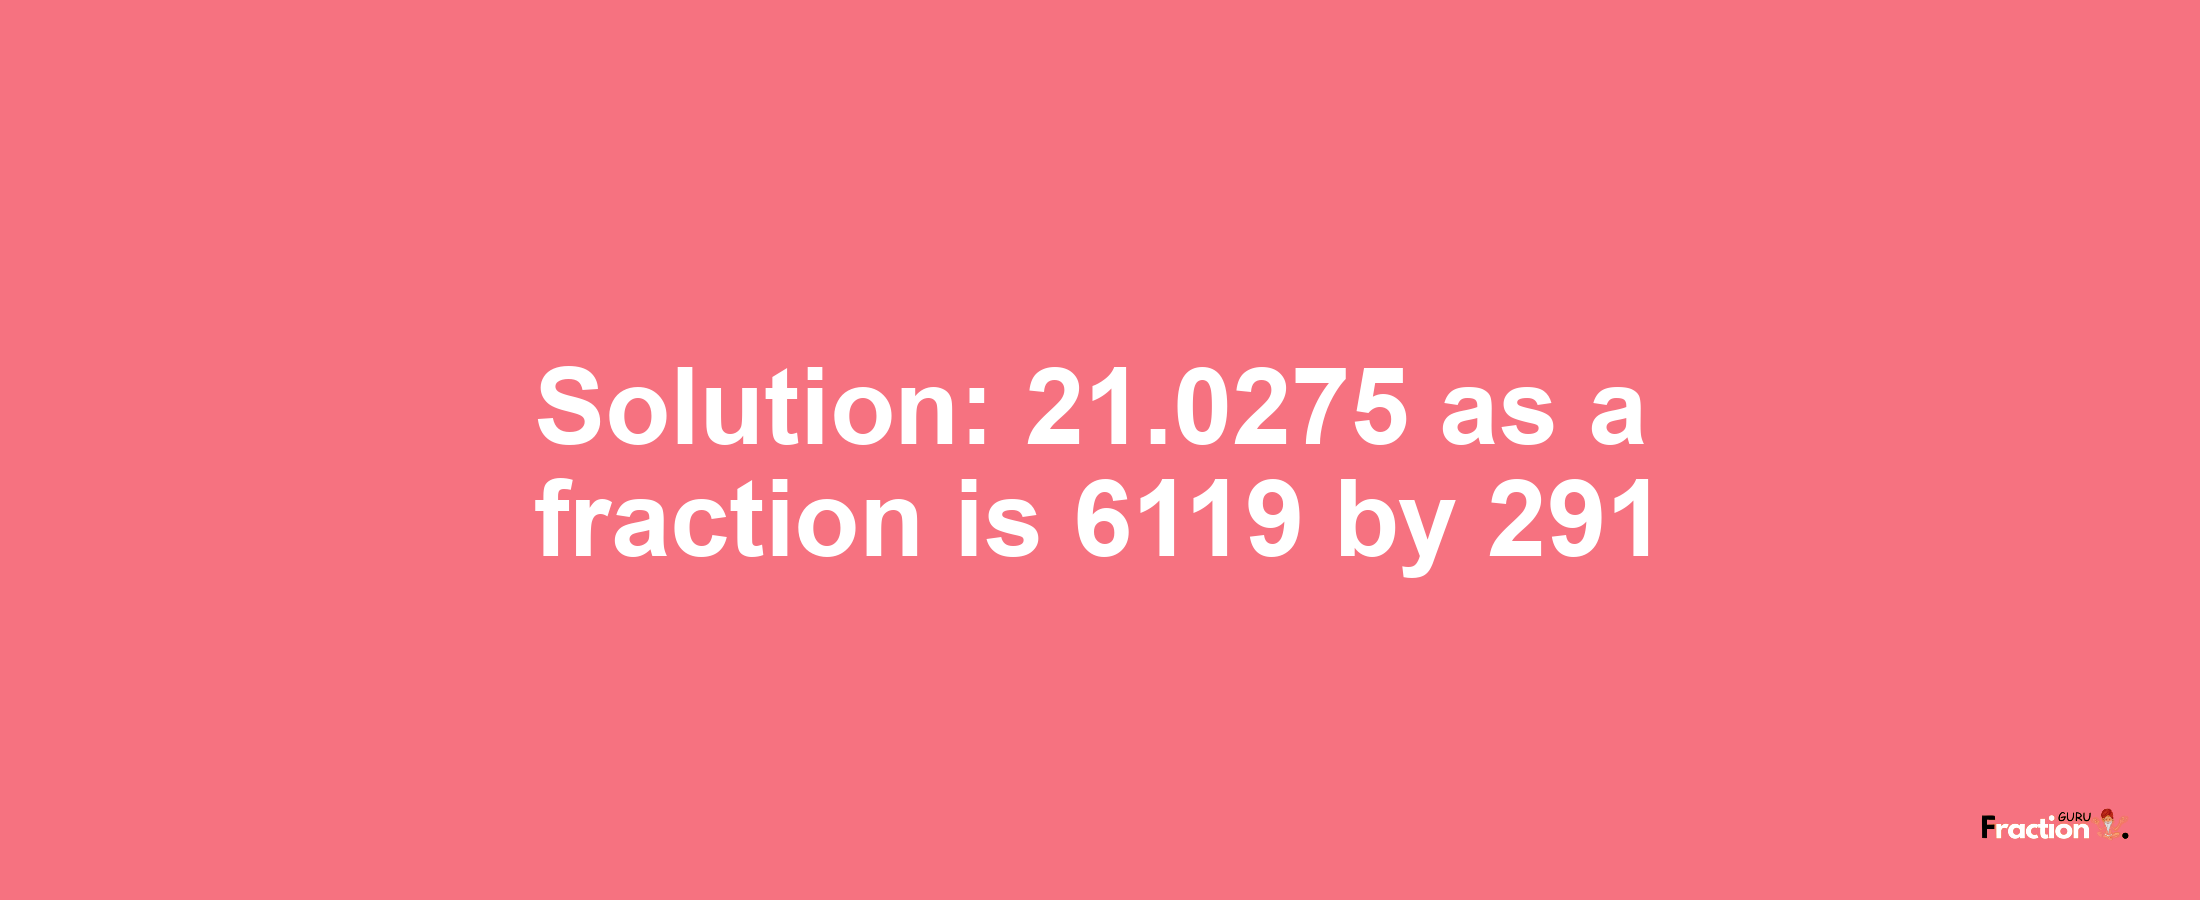 Solution:21.0275 as a fraction is 6119/291